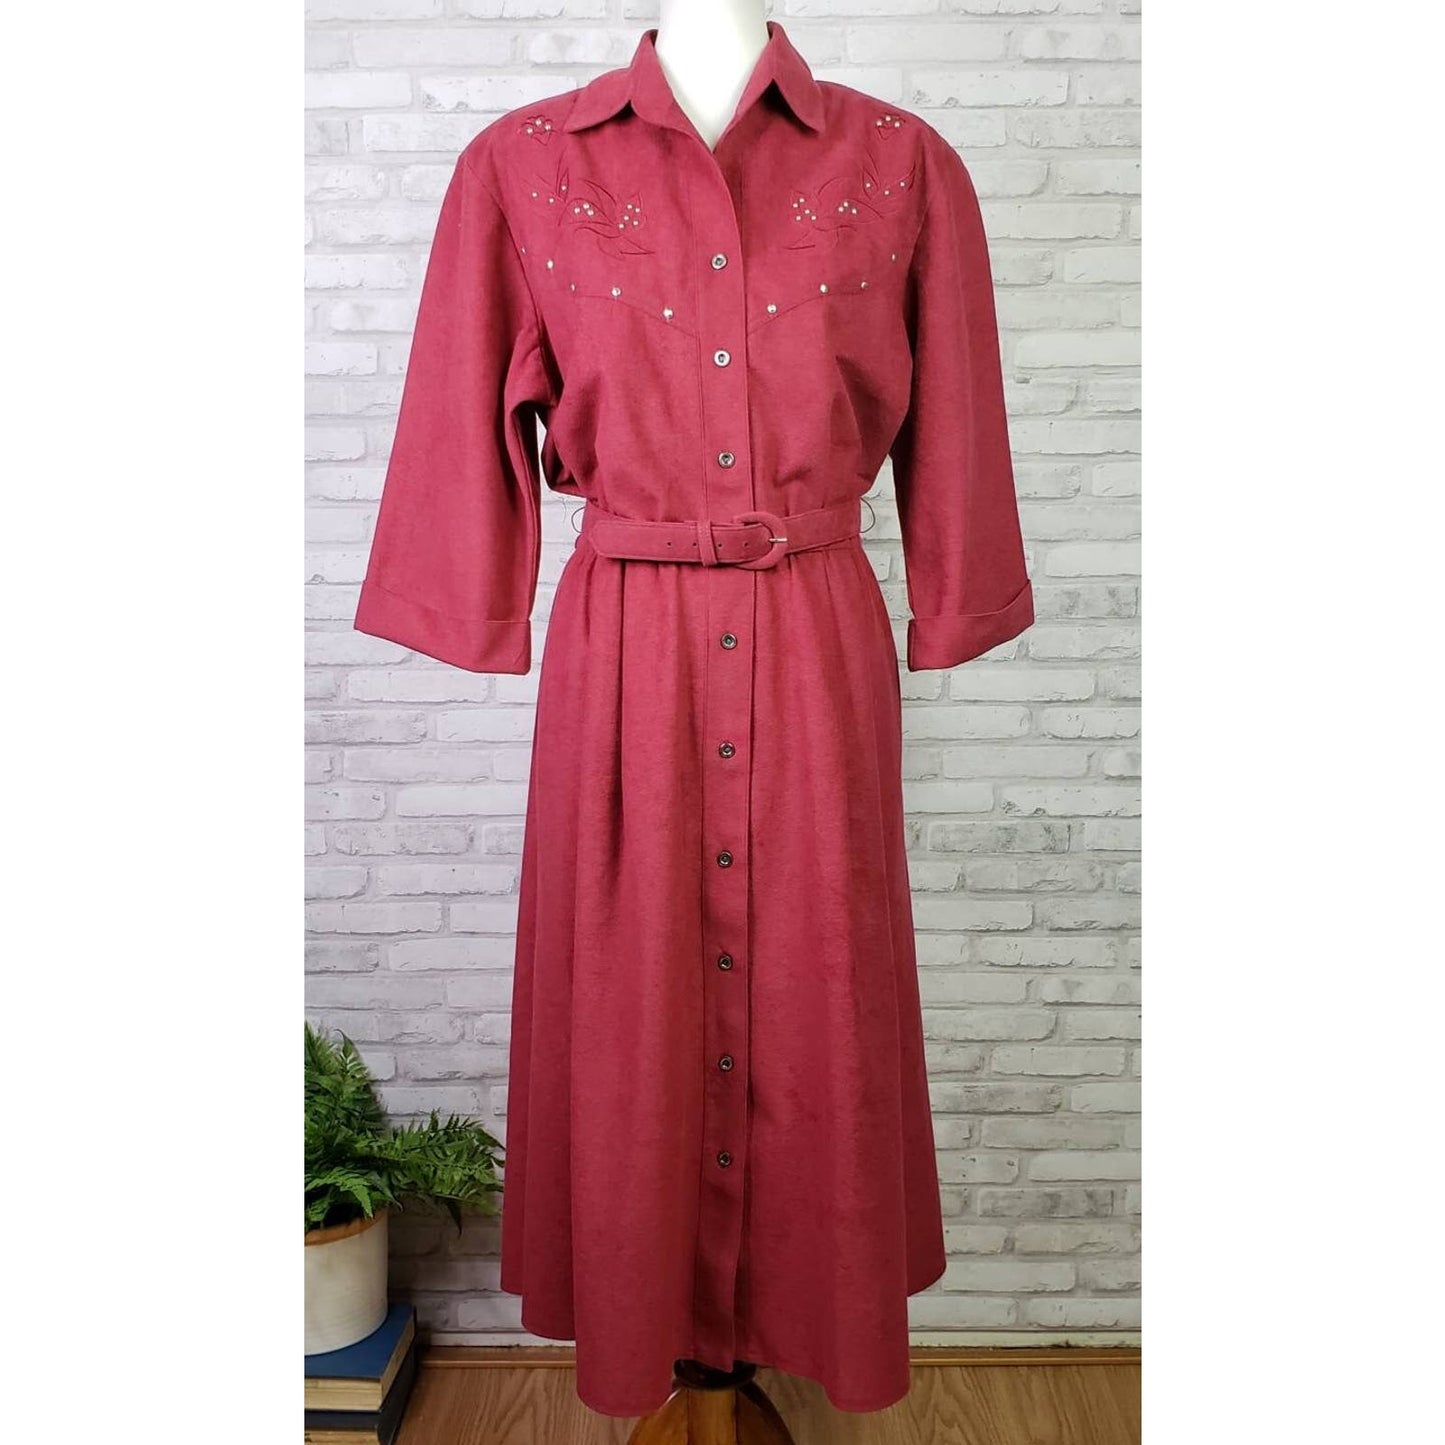 Willi of California ultrasuede dress in merlot red with embroidery and studs, 1970s vintage size 14